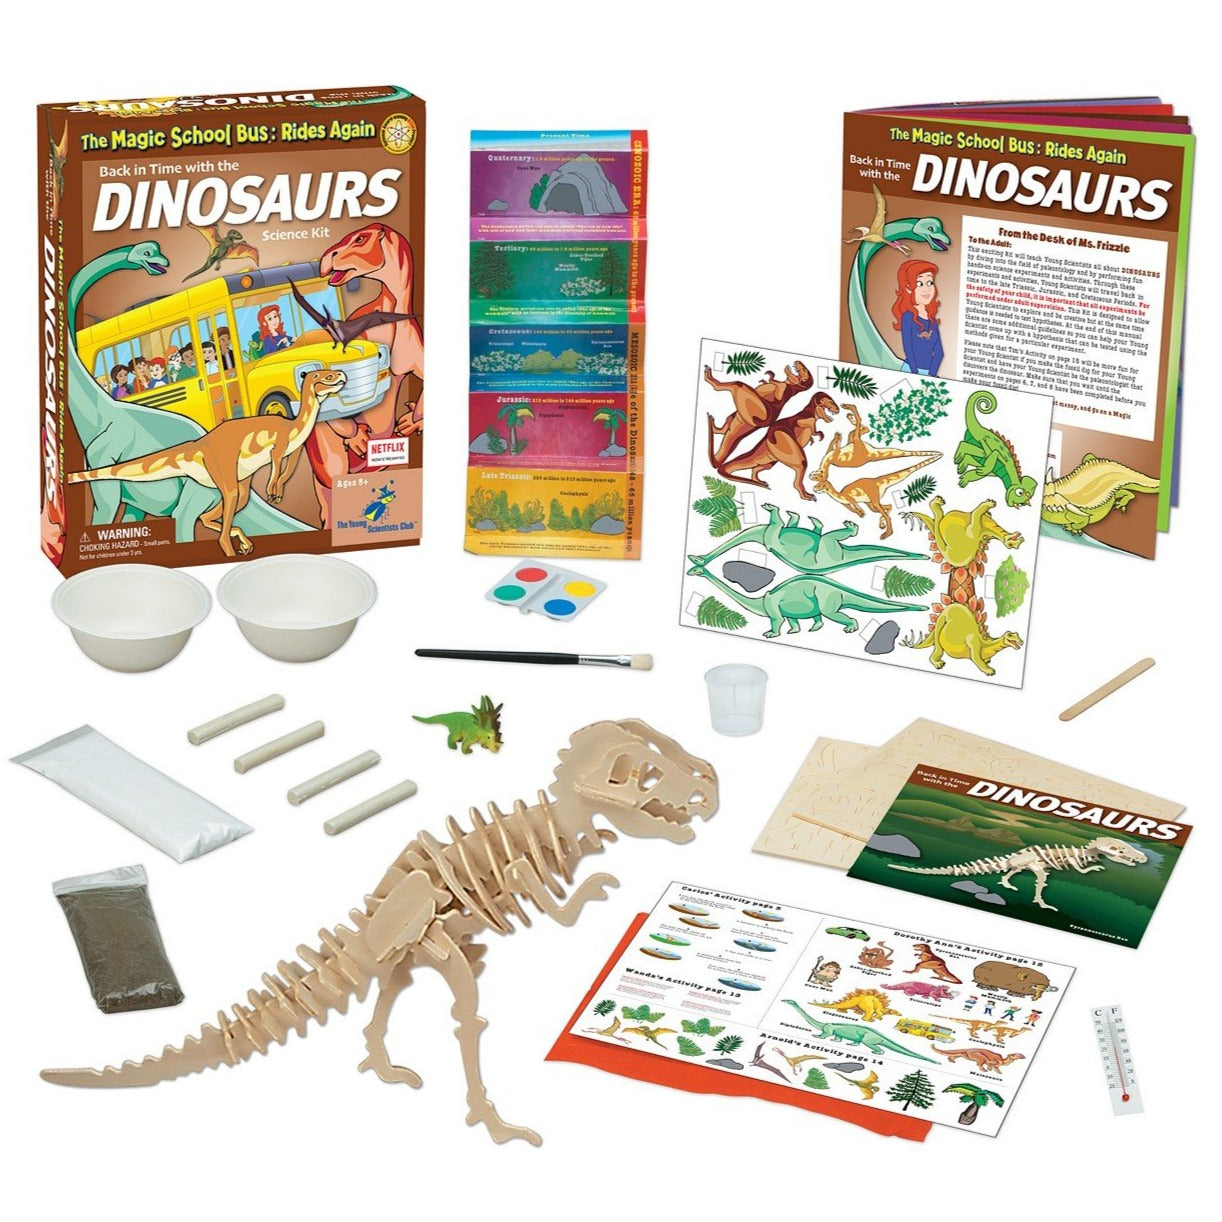 The Magic School Bus: Back in Time with the Dinosaurs